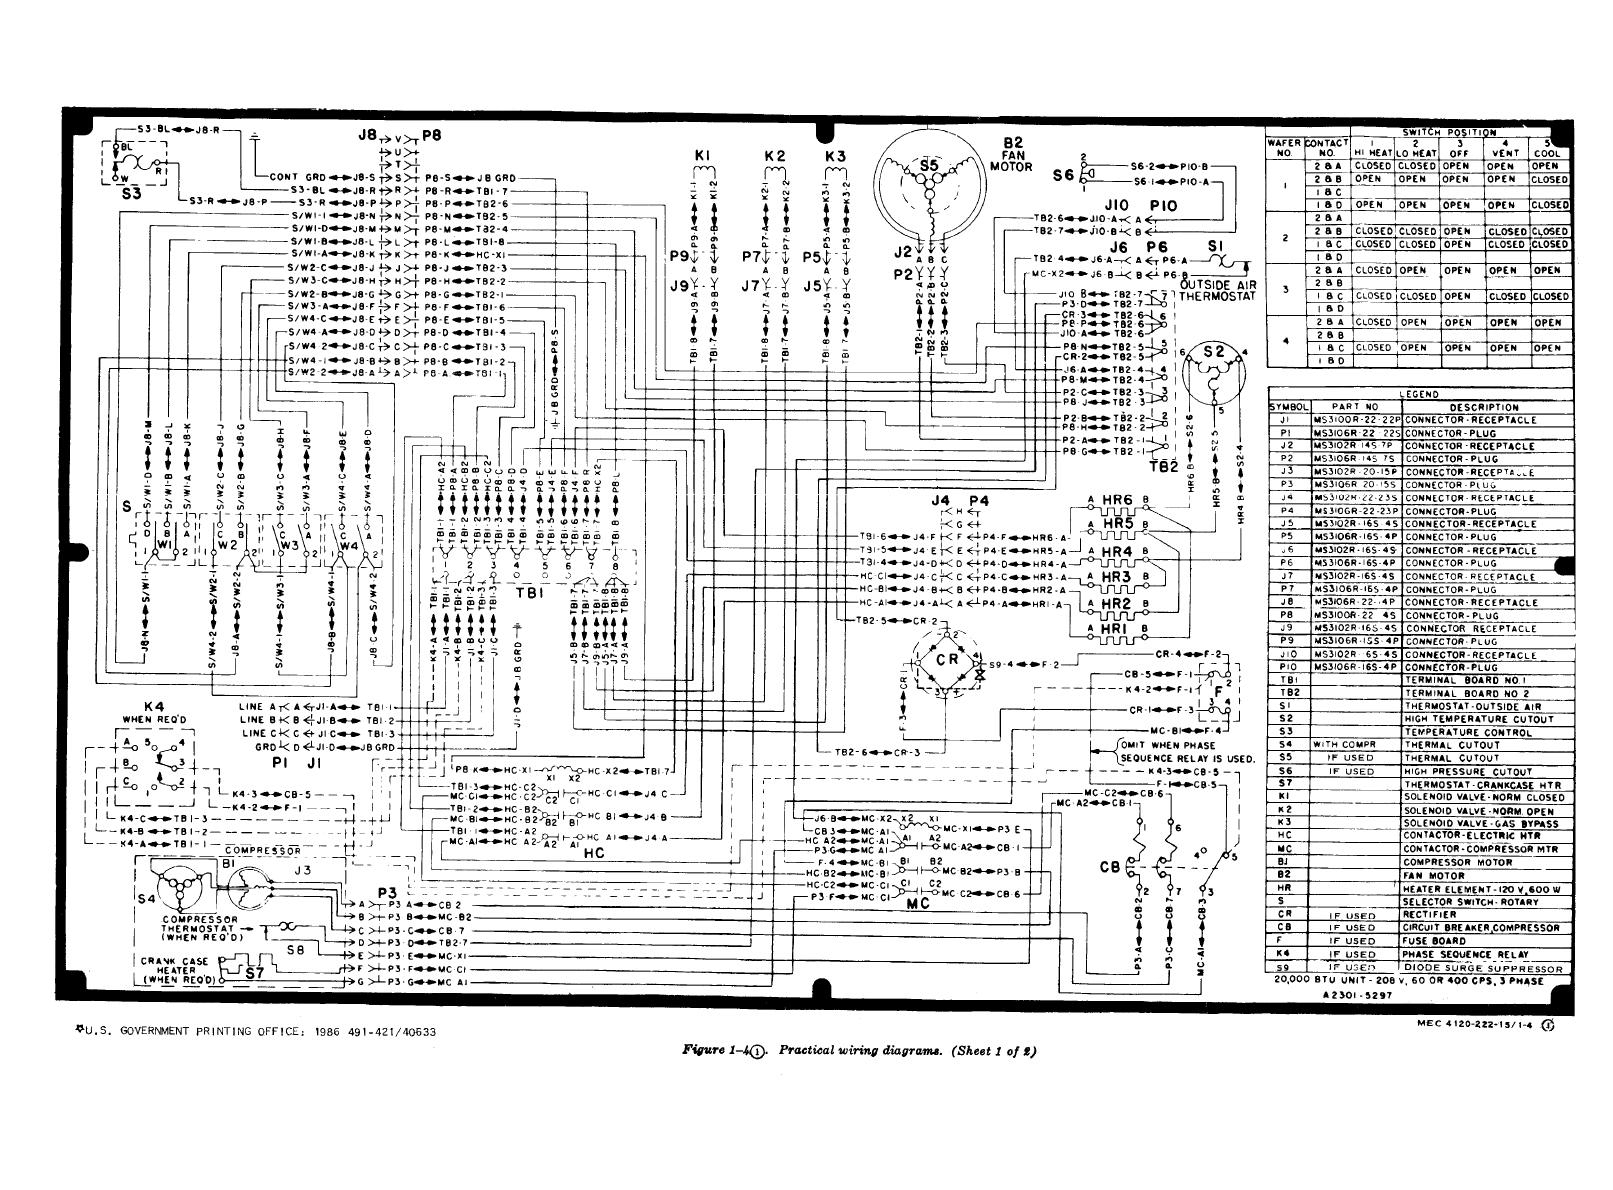 Wiring Diagram For Trane Thermostat | Wiring Library - Trane Thermostat Wiring Diagram